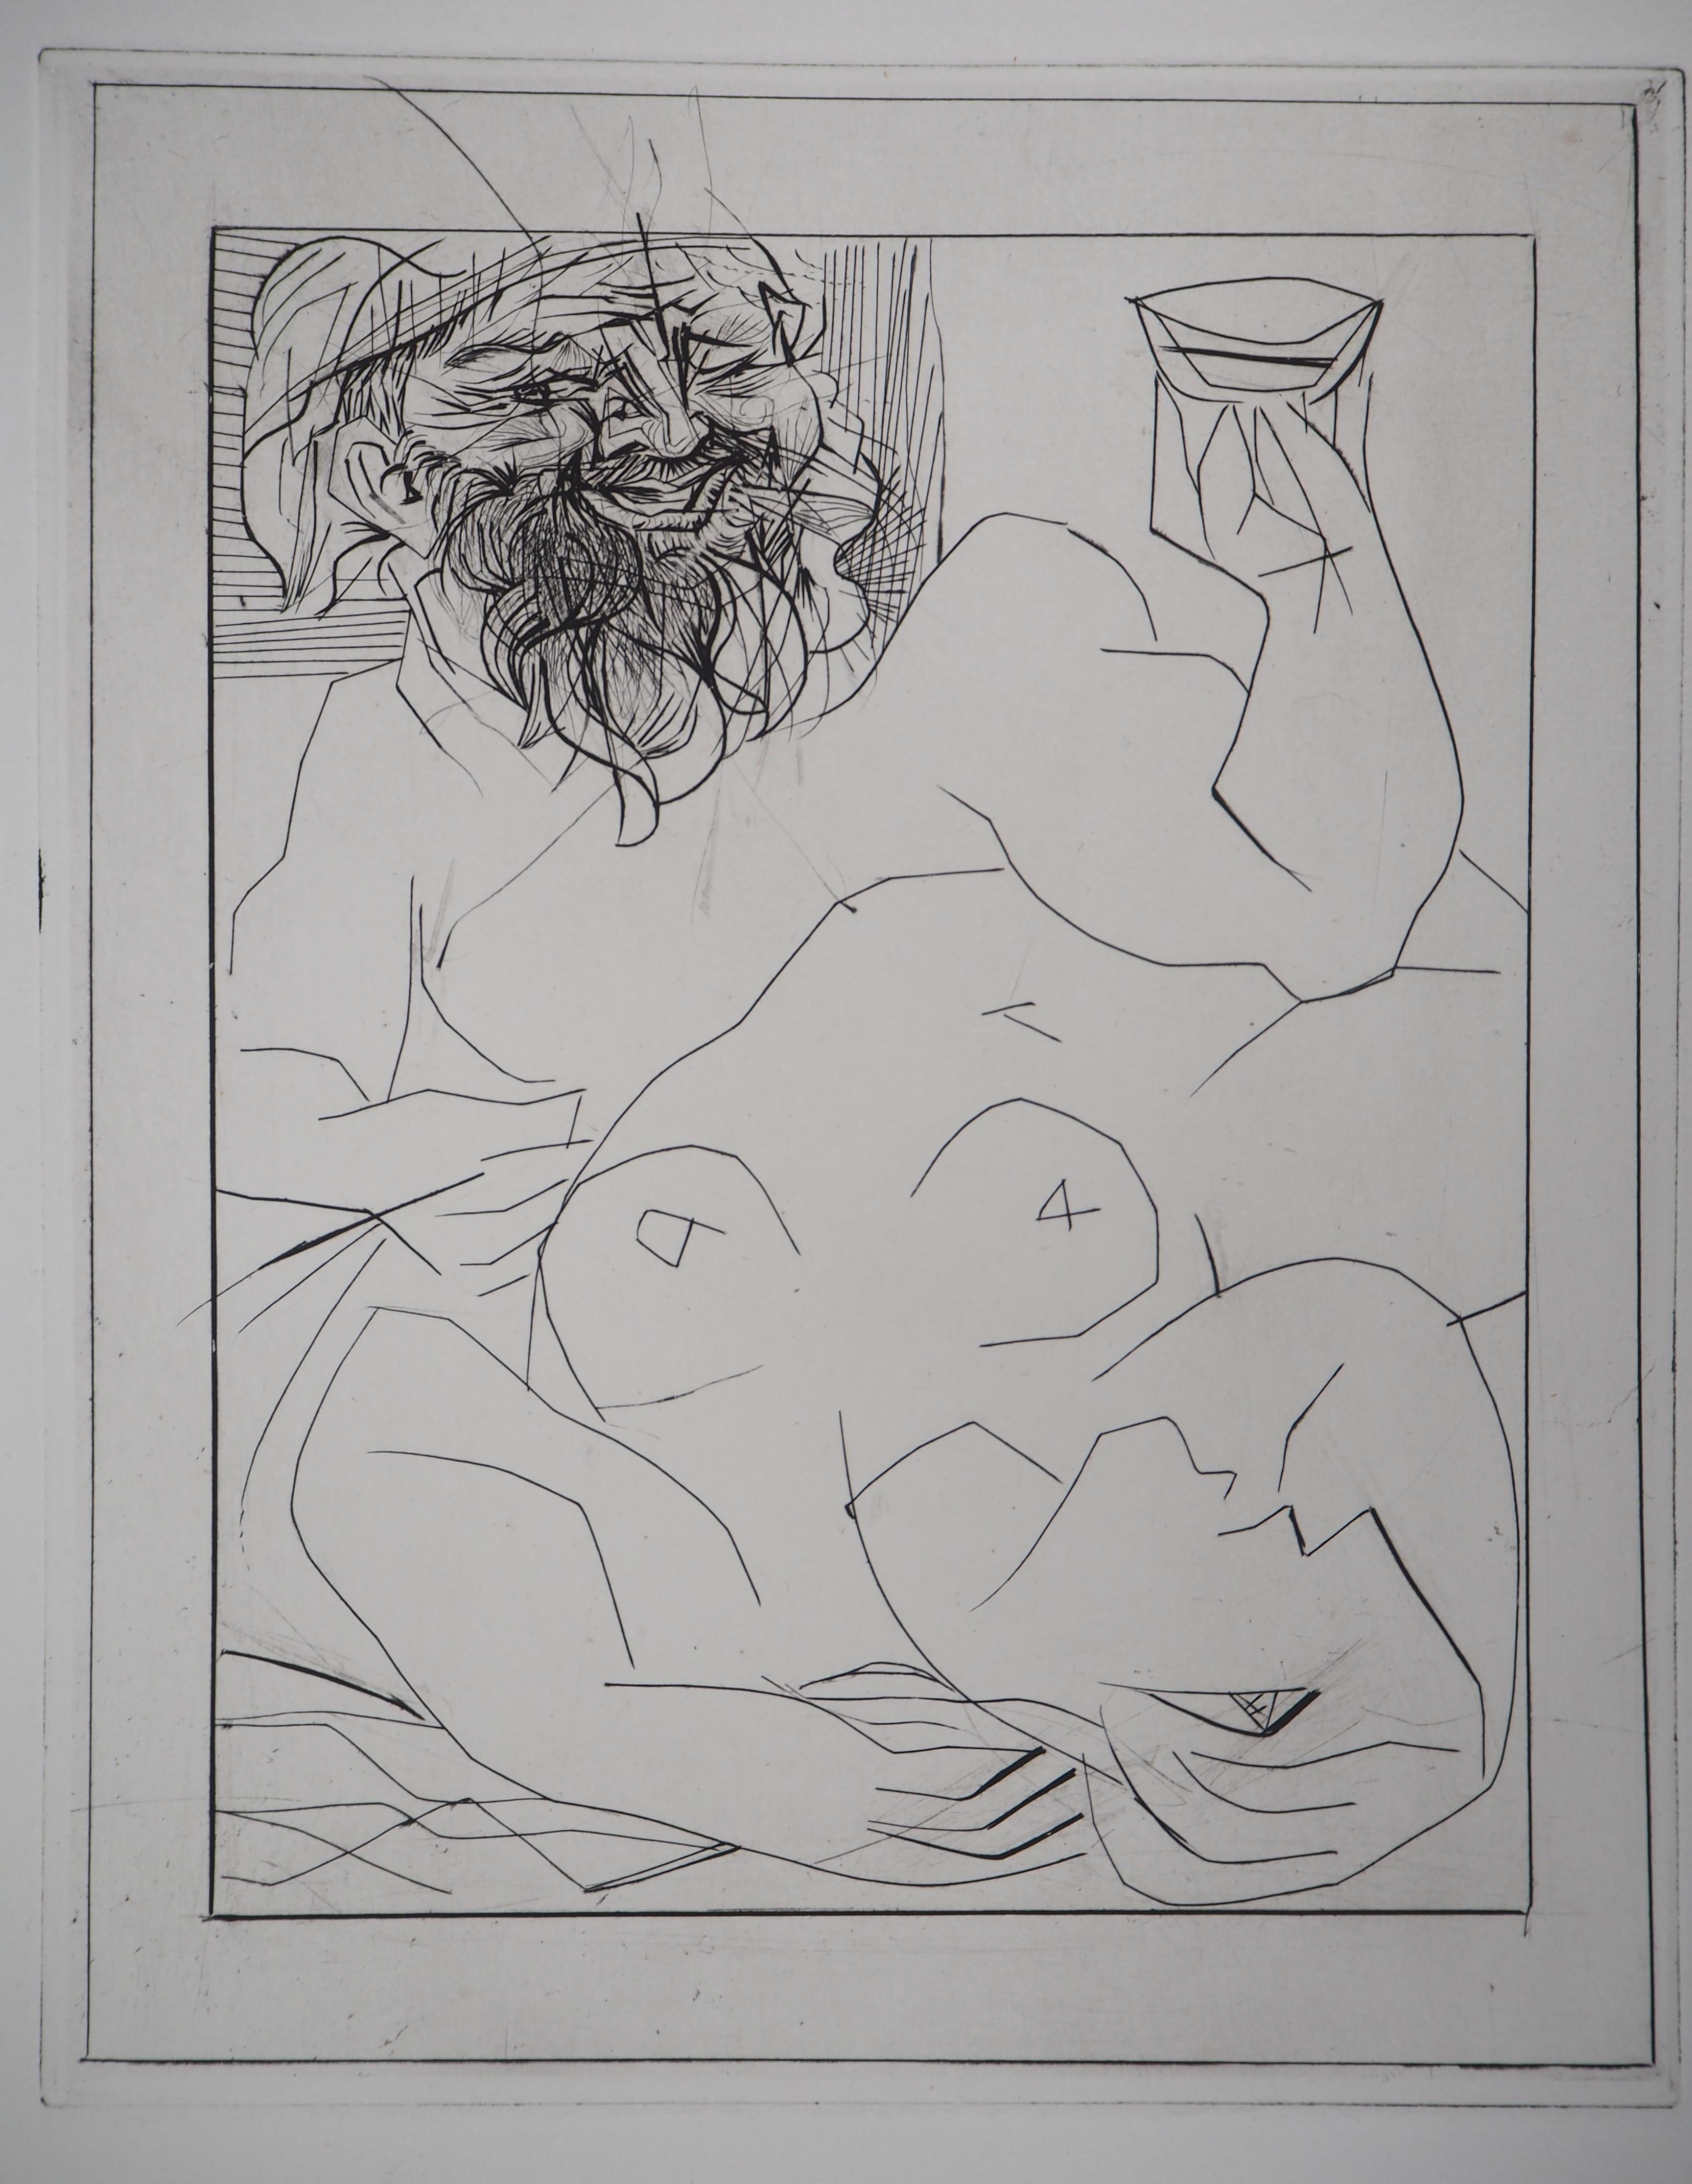 Pablo Picasso Figurative Print - Bacchus and Reclining Nude - Original etching - Vollard edition - (Bloch #284)